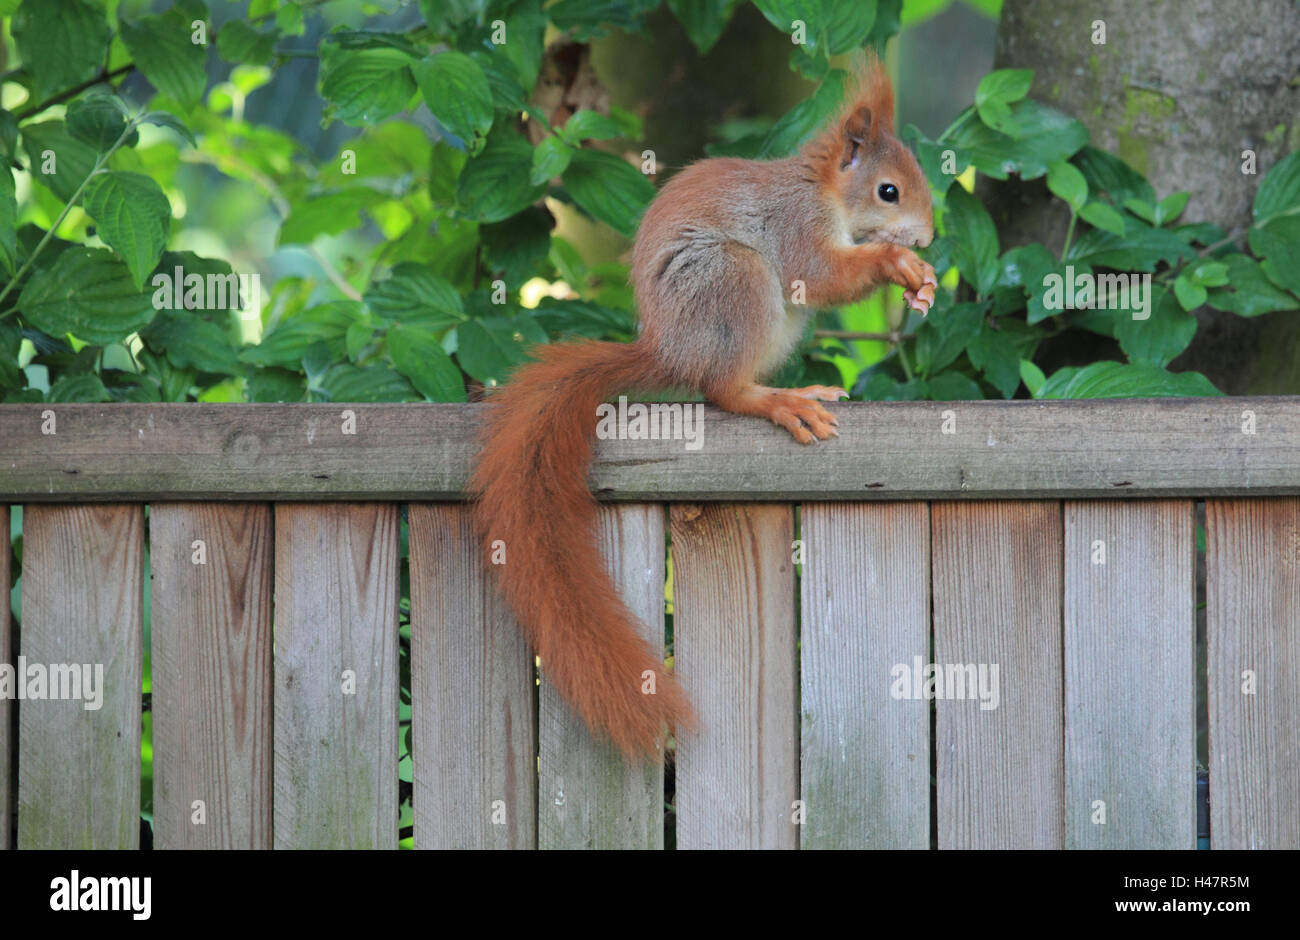 Squirrel, side view, eat, Germany, mammal, animal, wild animal, close-up, Stock Photo